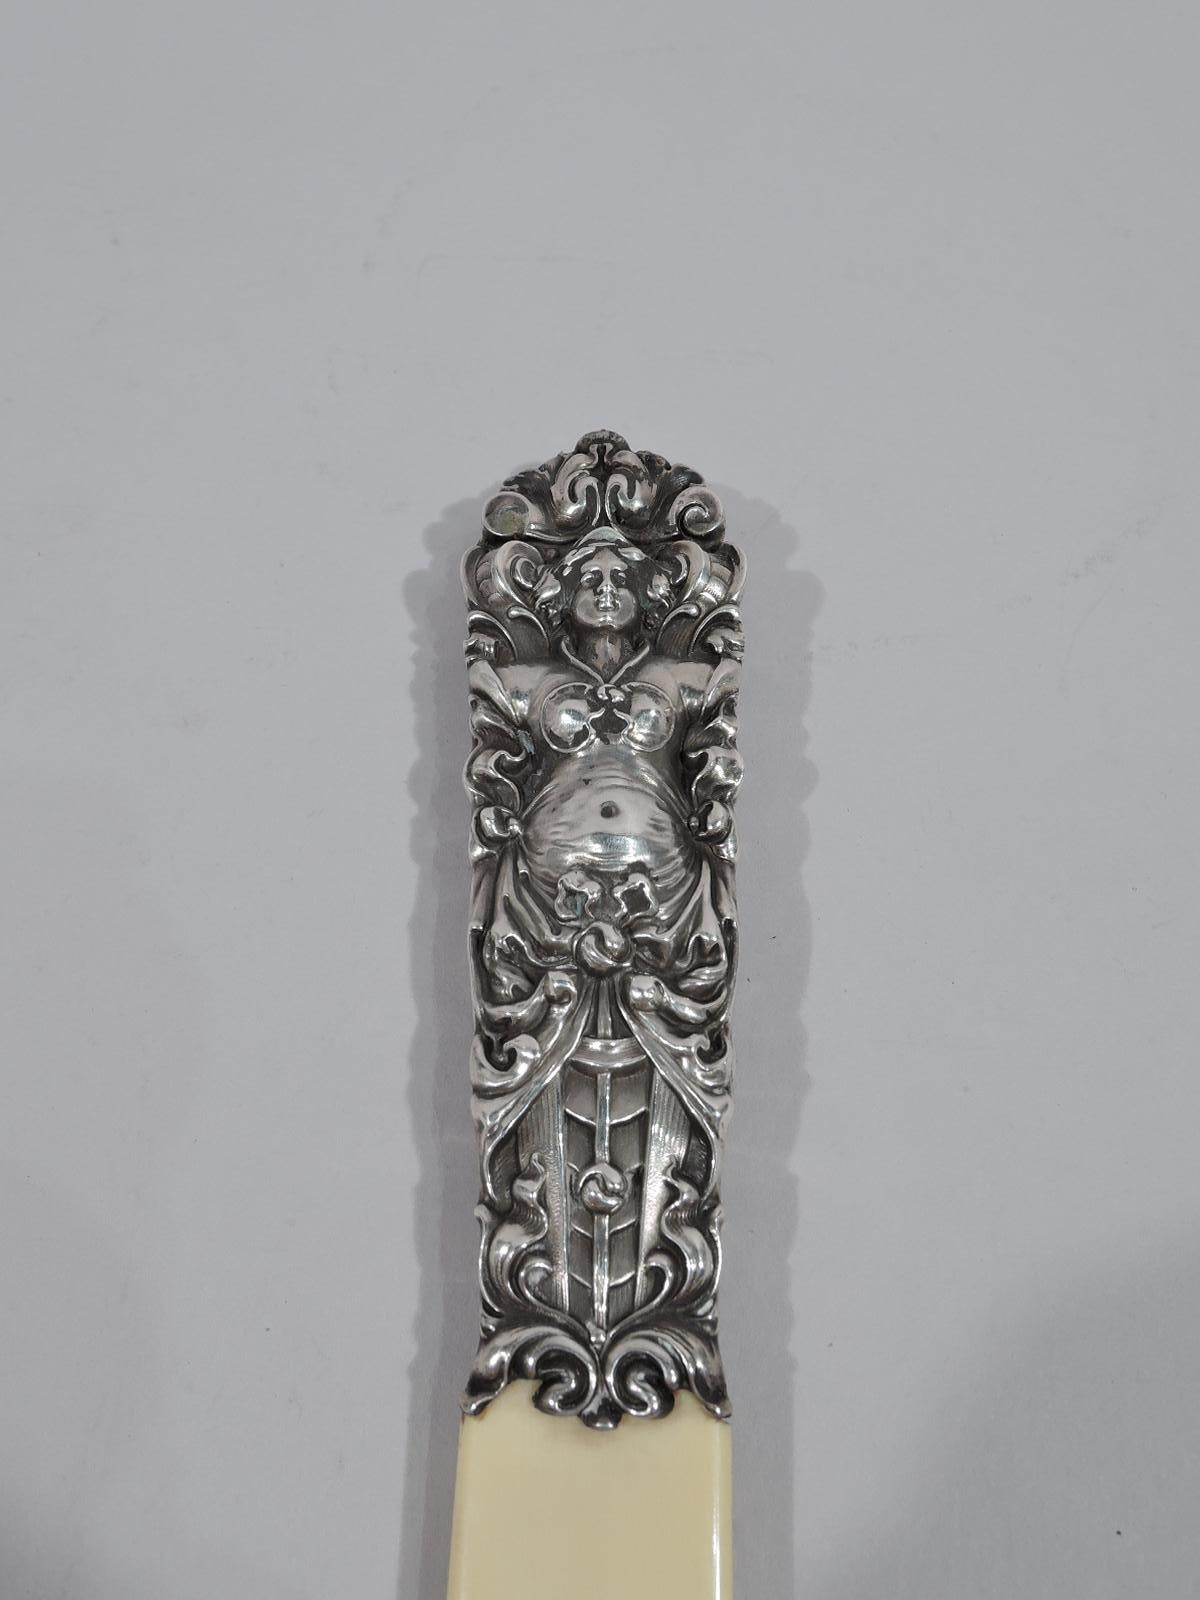 Turn-of-the-century classical Art Nouveau letter opener. Tooled and tactile double-sided silver handle in form of bosomy caryatid with drapery stretched over round belly. Blade flat with u-form tip. Appears to be unmarked. Gross weight: 1.6 troy